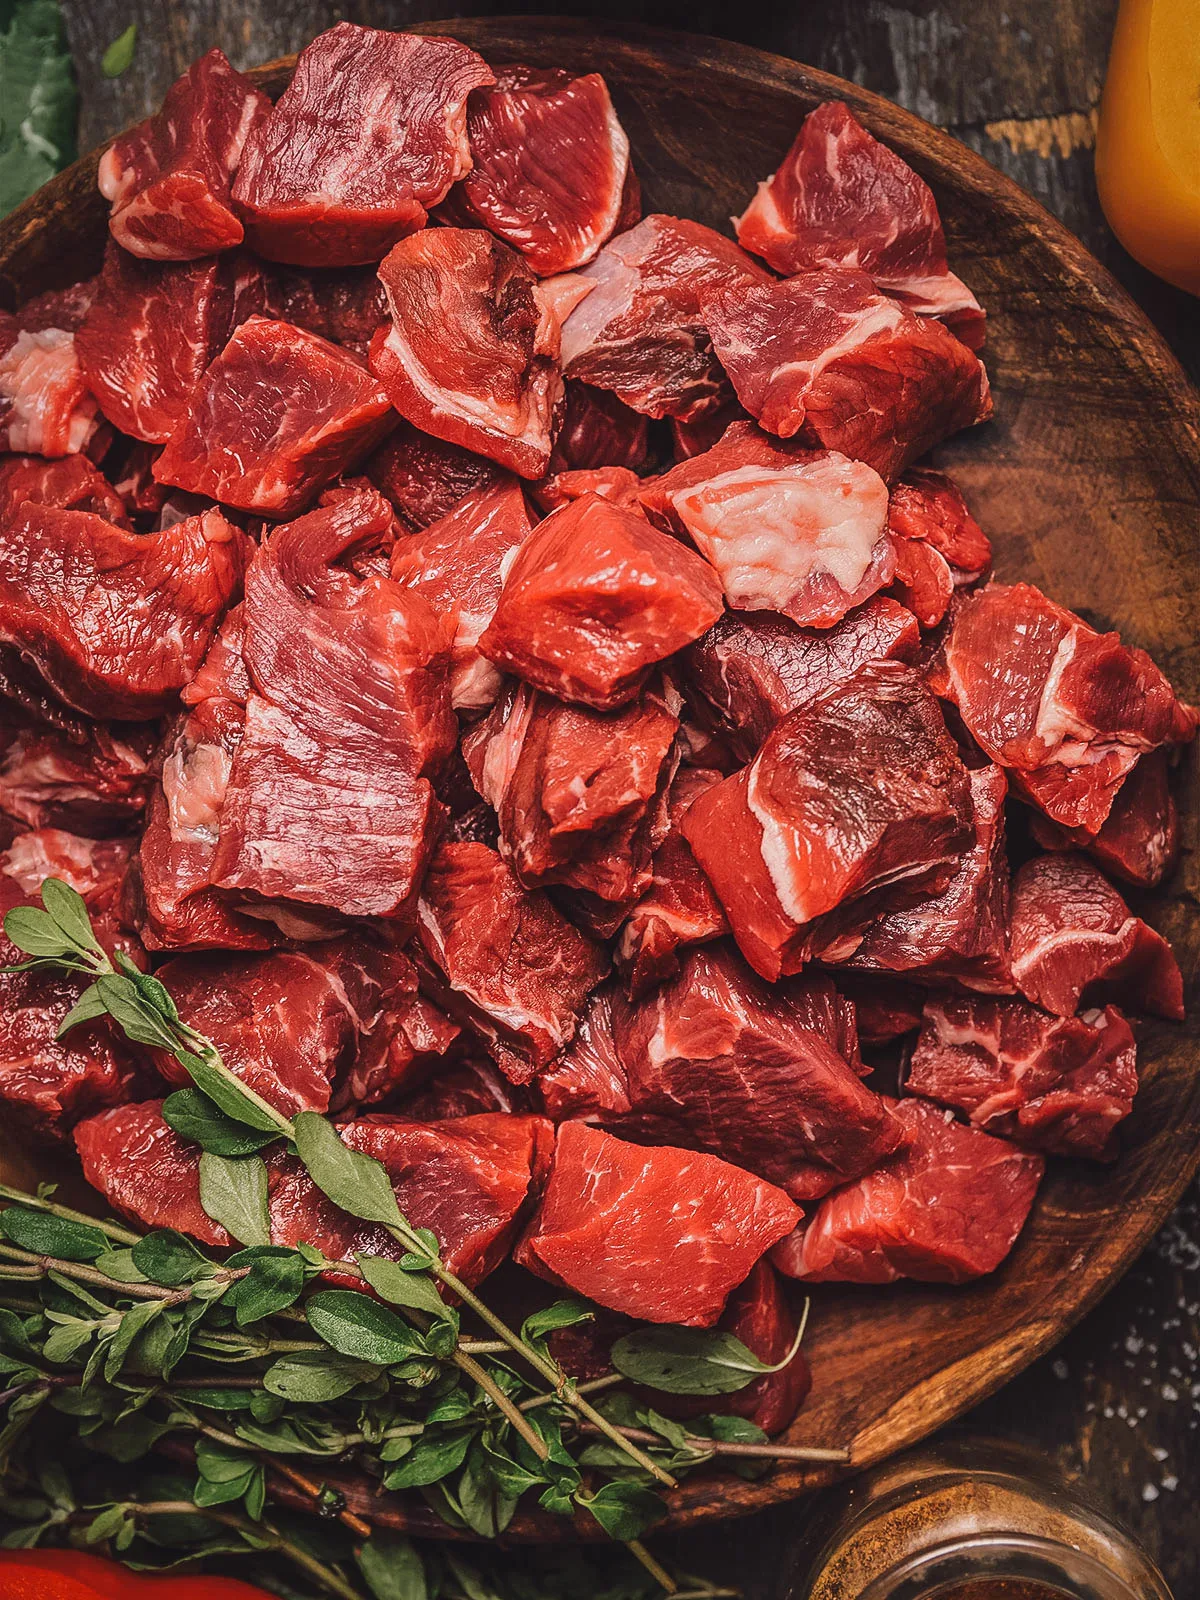 Tere siga or cubes of raw red meat